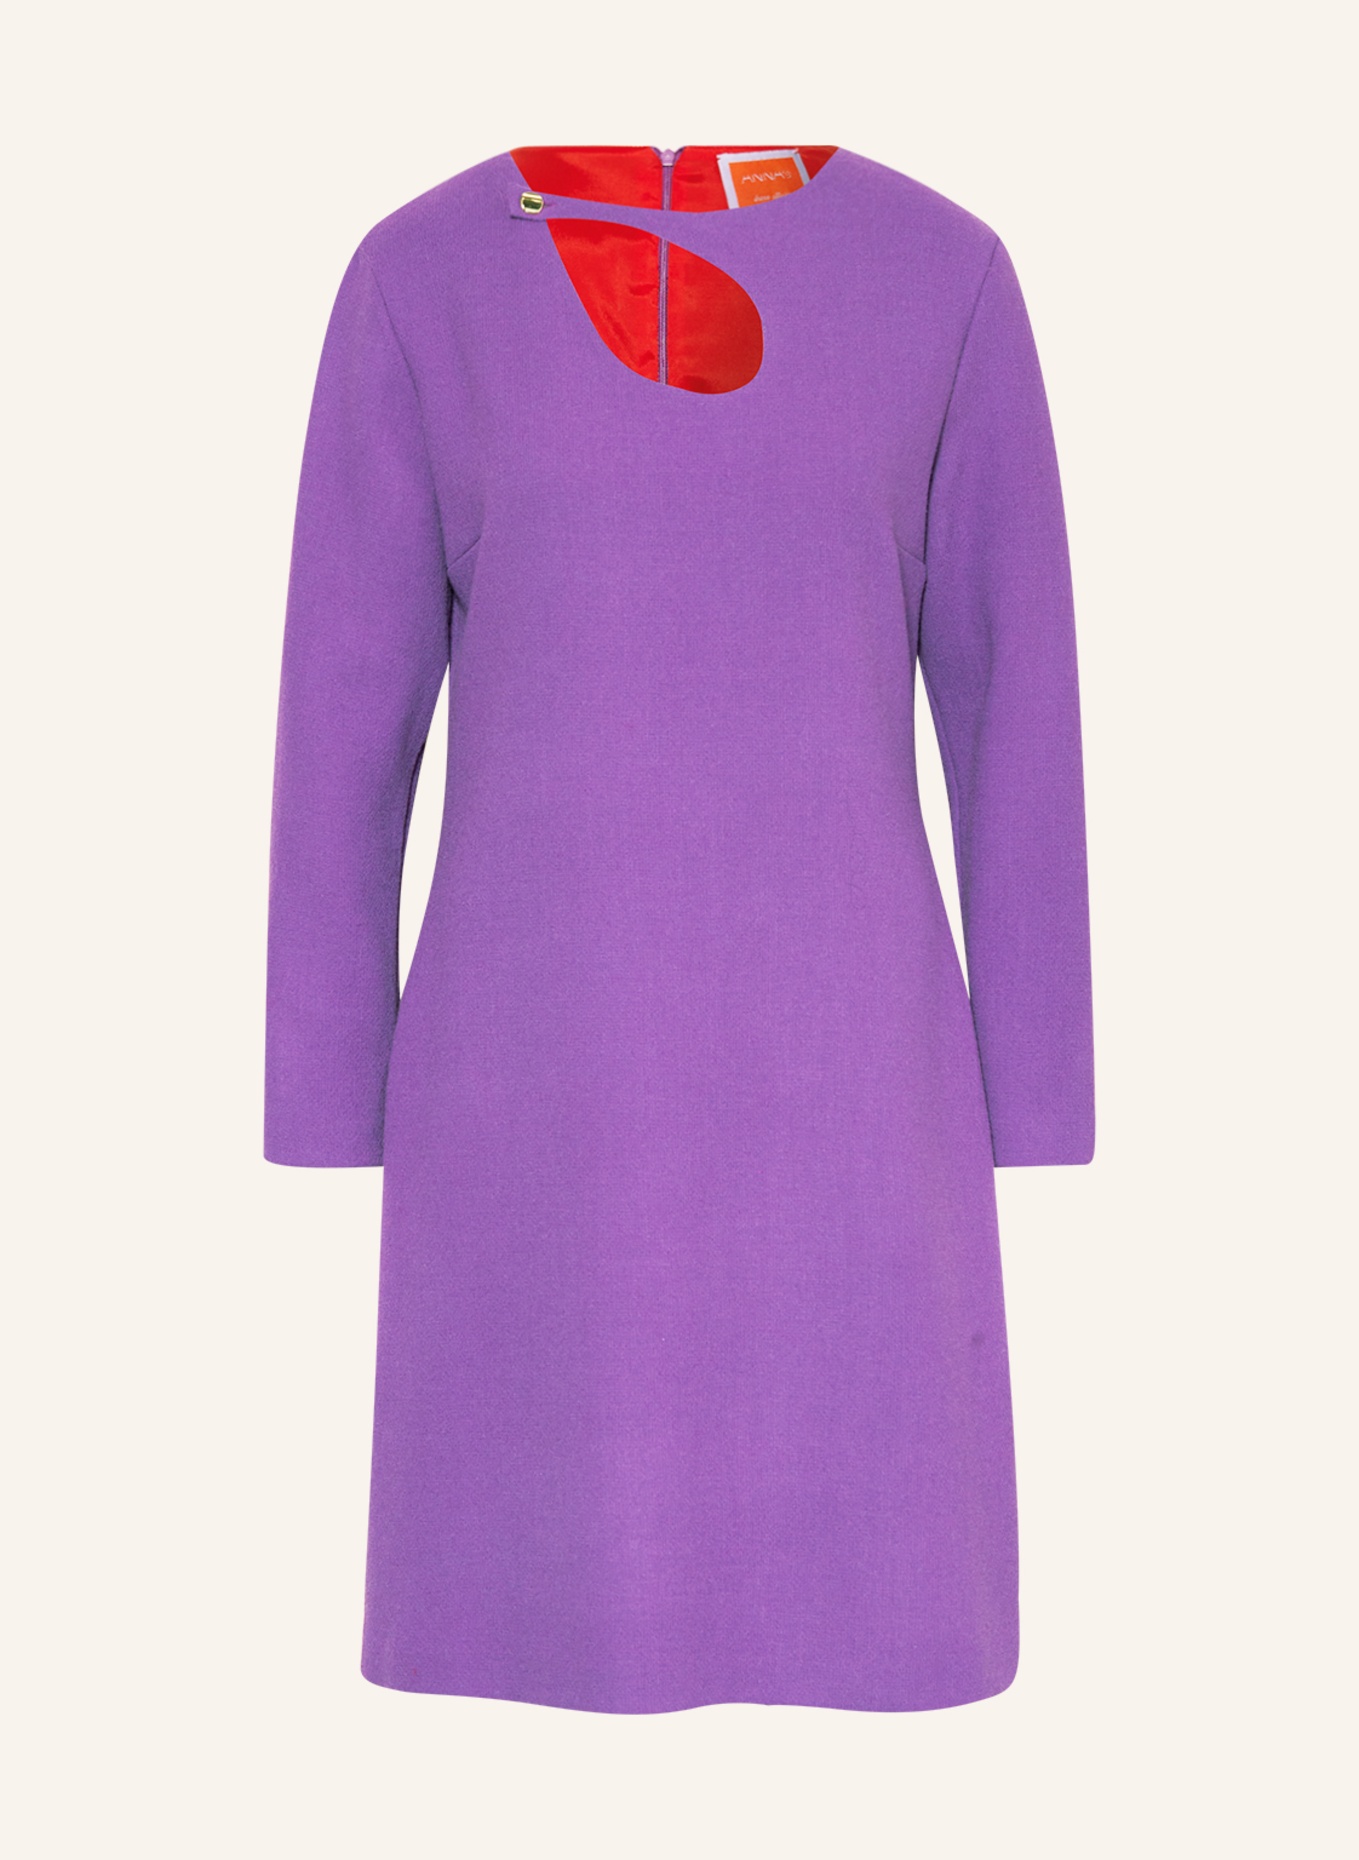 ANNA's Dress with cut-out, Color: PURPLE (Image 1)